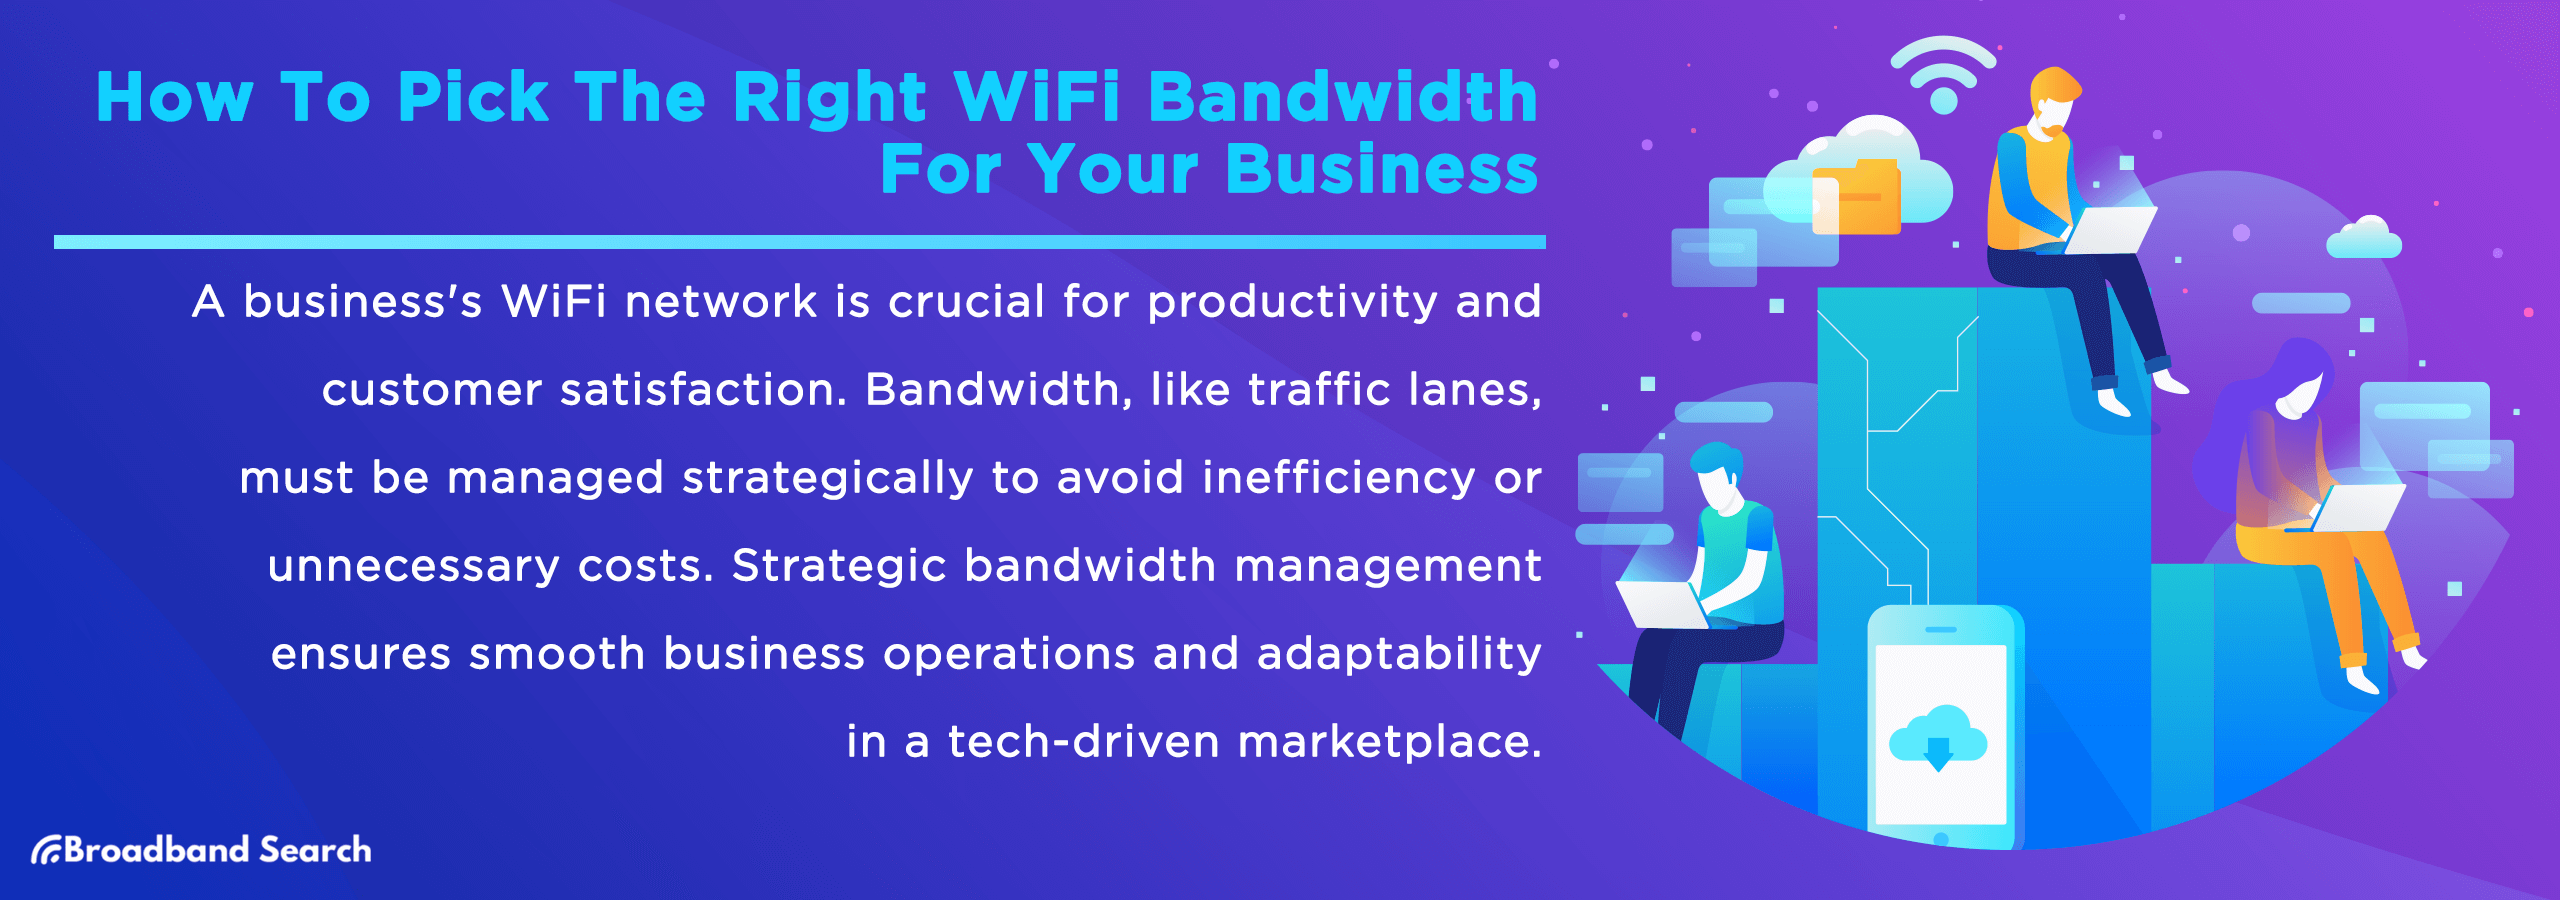 How Much Wi-Fi Bandwidth Do I Need For My Business?